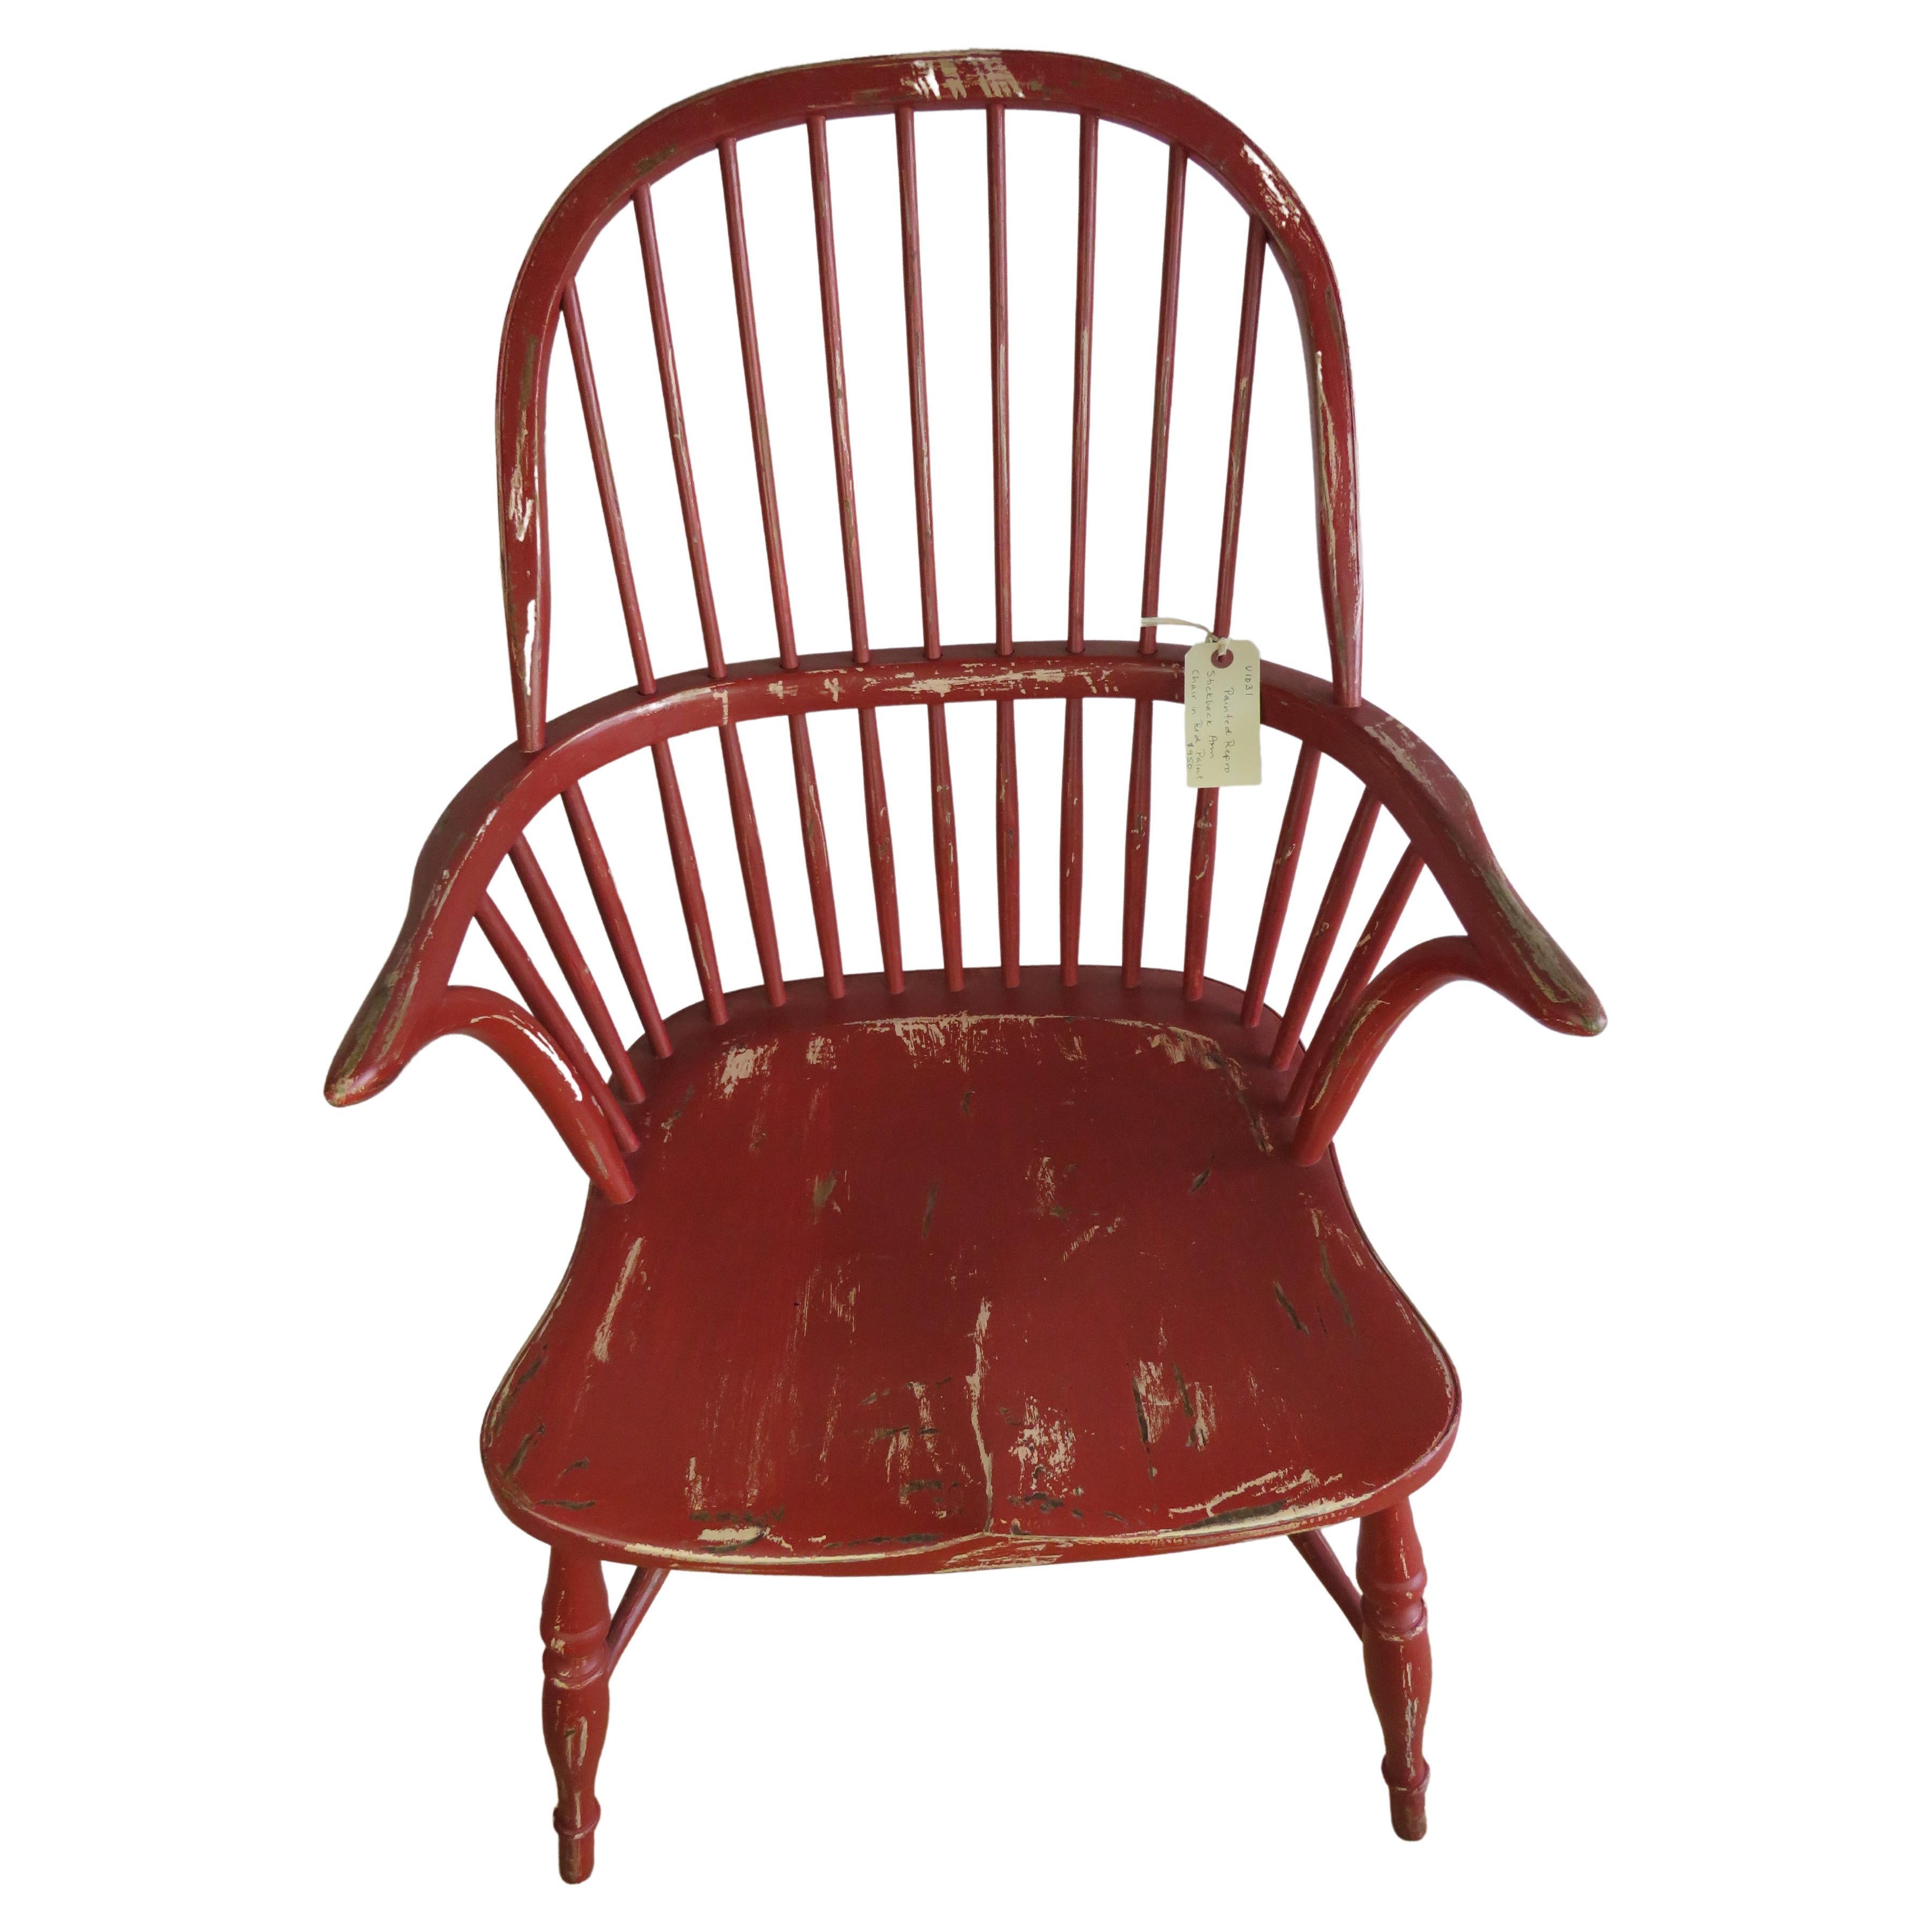 English Reproduction Stick Back Arm Chair in Red Paint